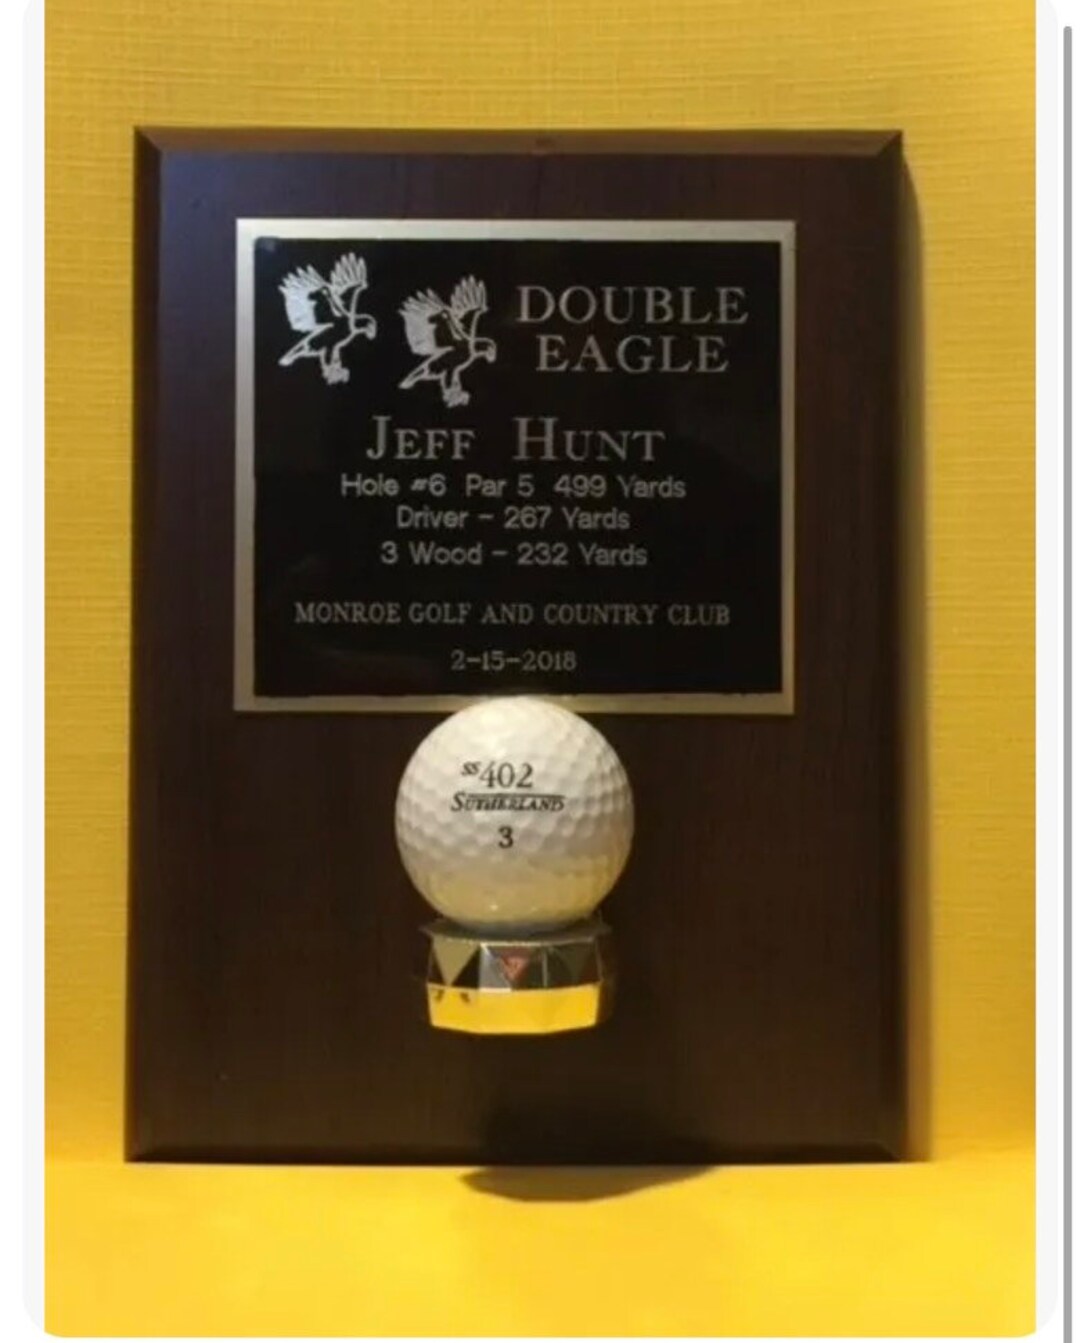 Double Eagle Golf Award Trophy Plaque Holds Your Golf Ball - Etsy